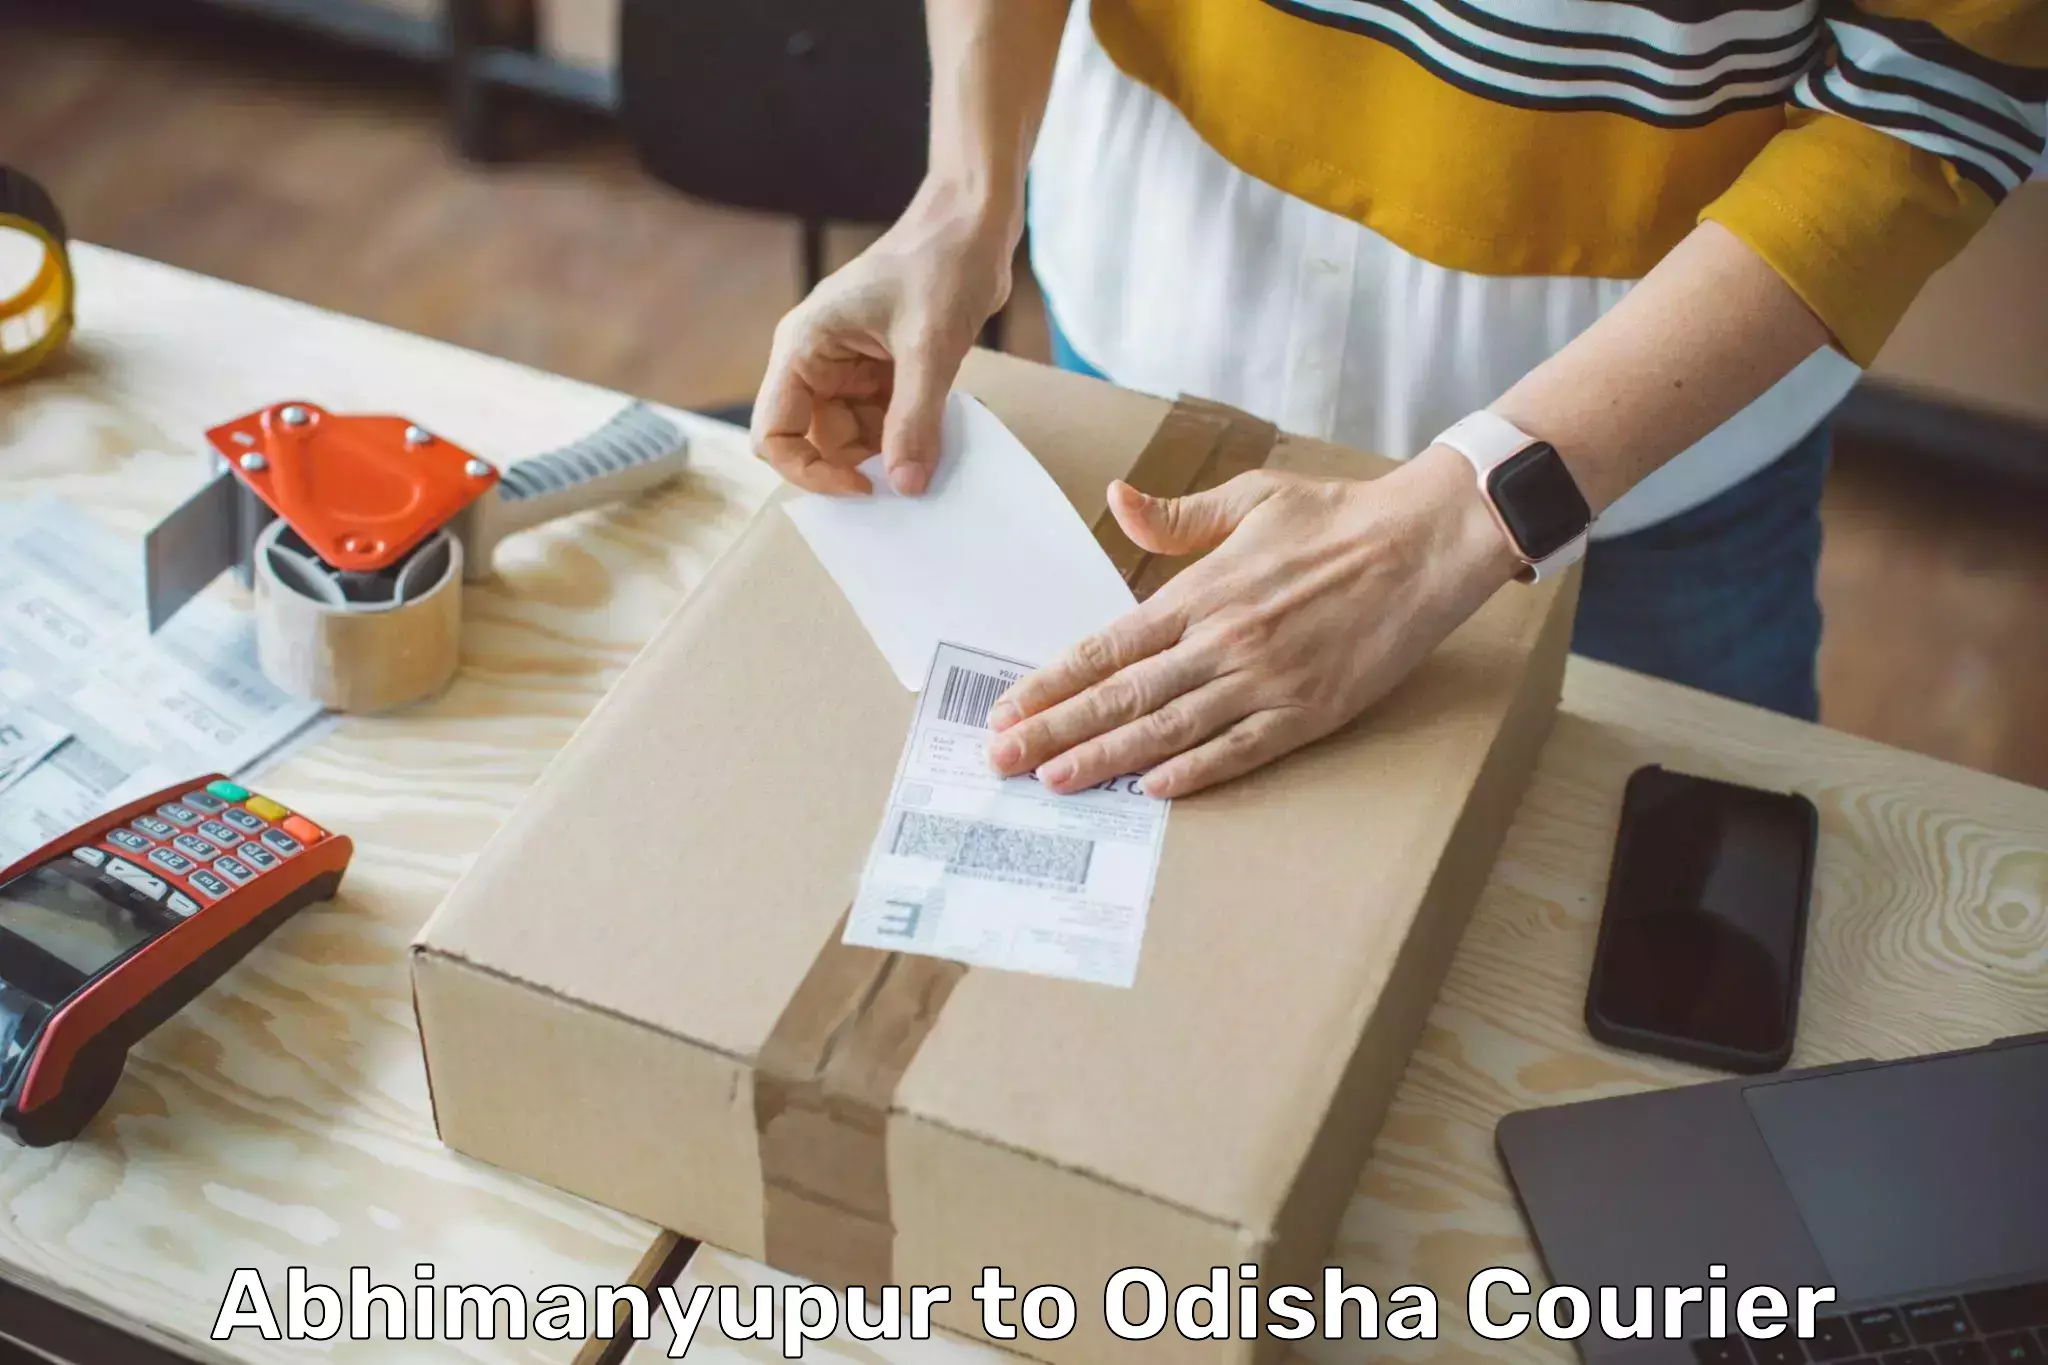 Cost-effective courier options Abhimanyupur to Bonth